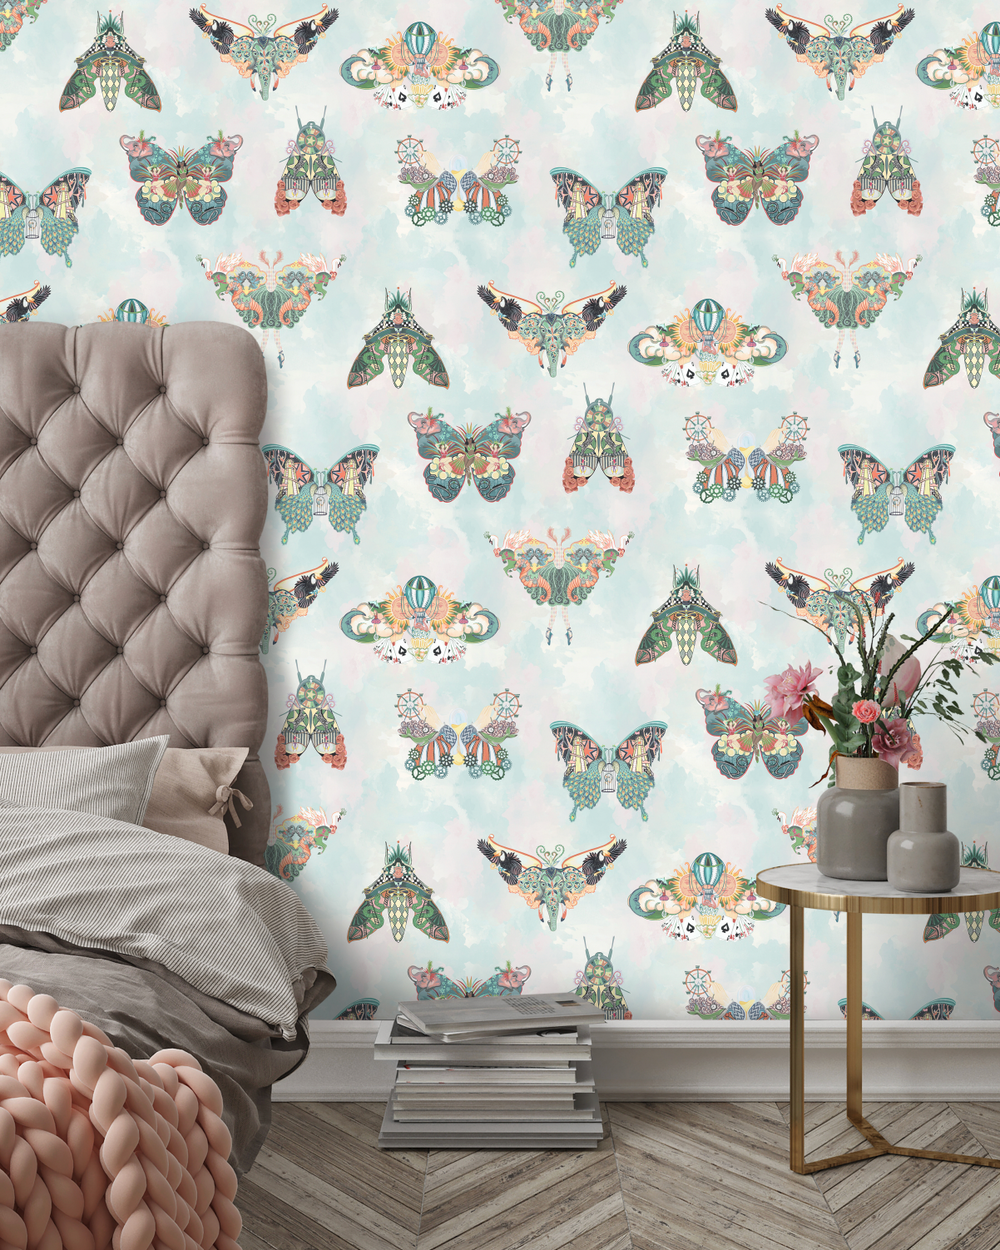 brand-mckenzie-carnval-fever-butterfly-effect-green-multi-sky-clouds-whimsical-illusional-wallpaper